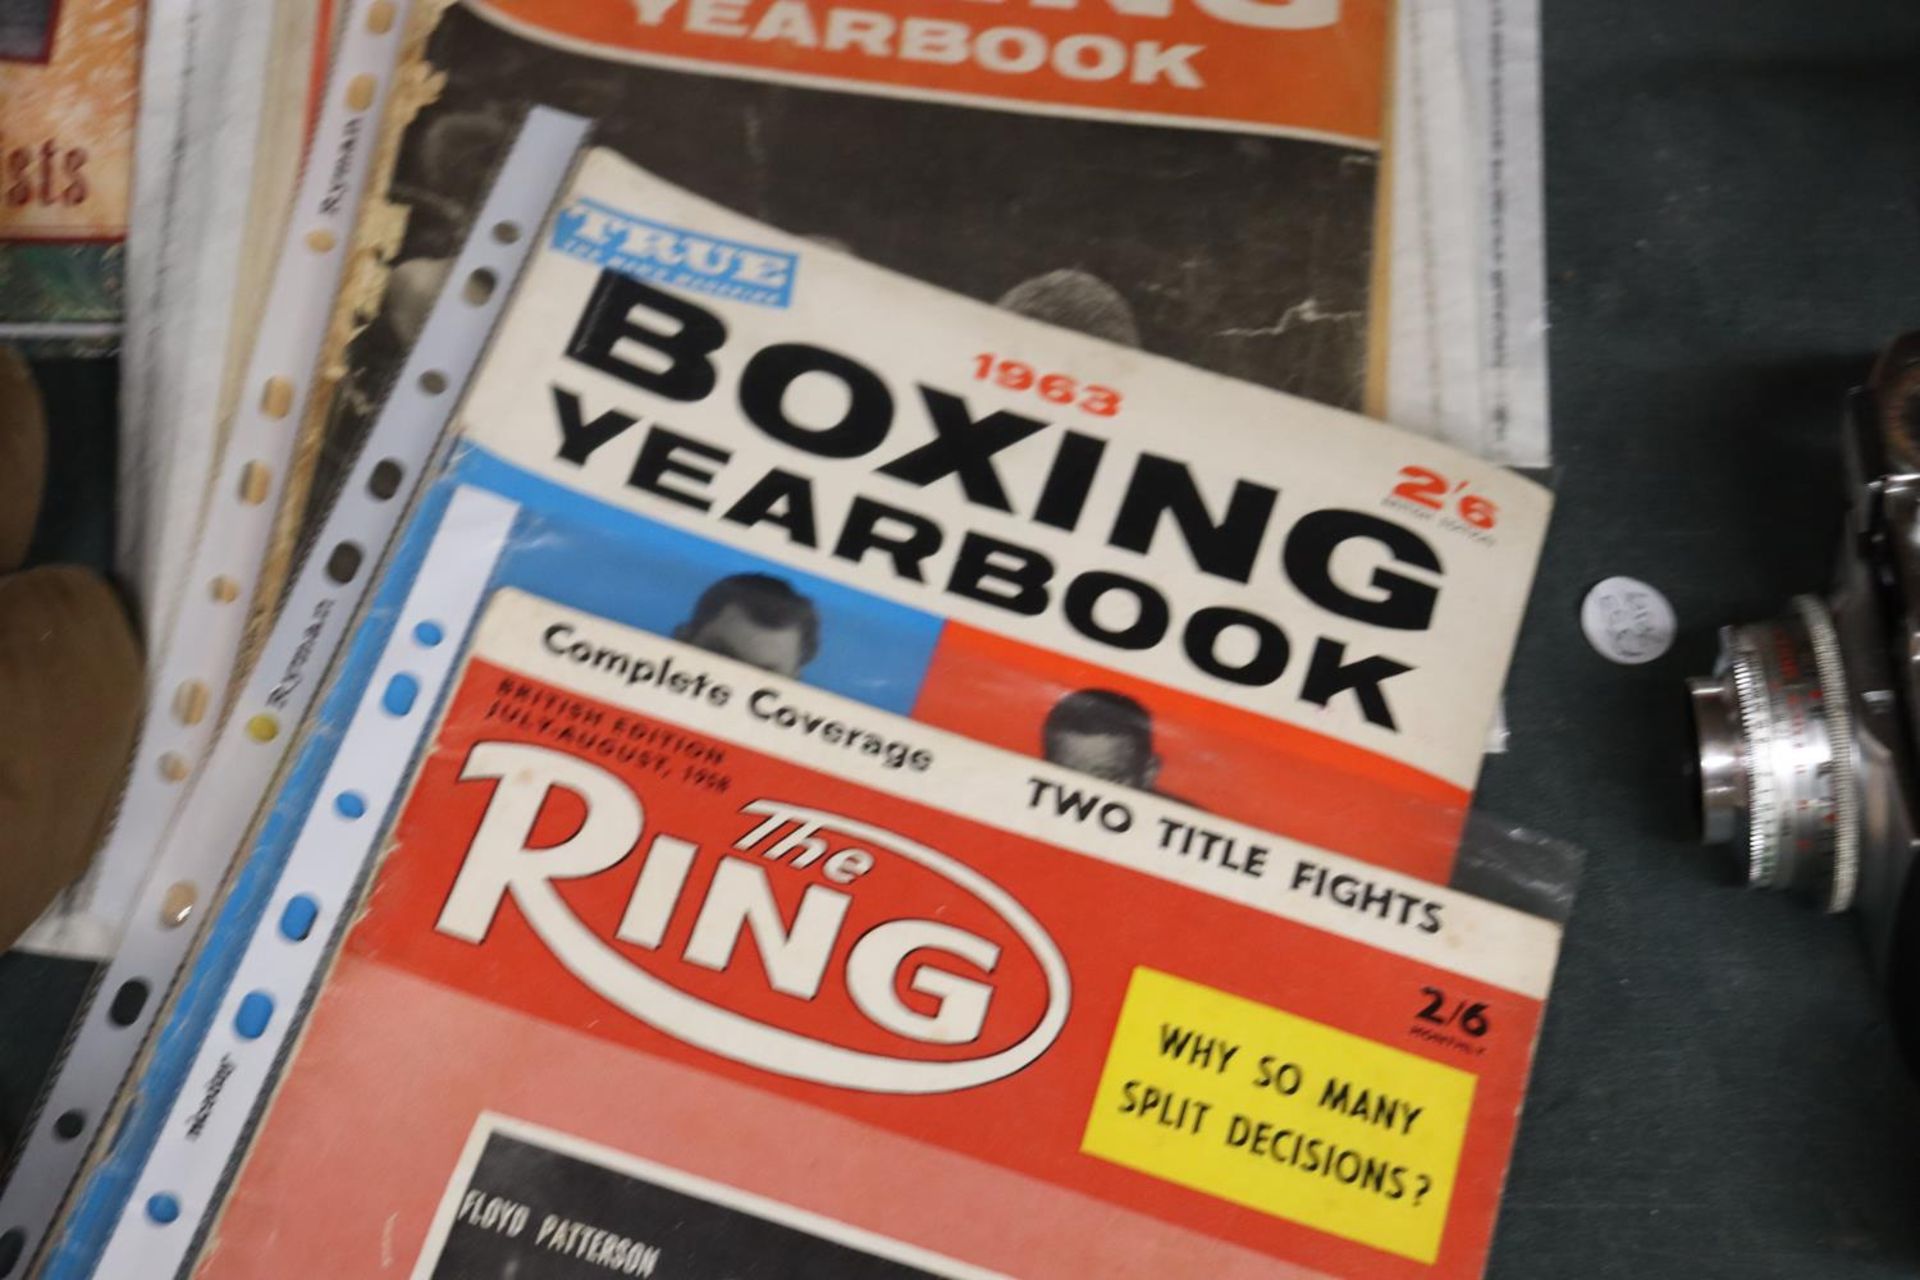 A COLLECTION OF VINTAGE BOXING ITEMS TO INCLUDE GLOVES, BOOK AND MAGAZINES - Image 6 of 7